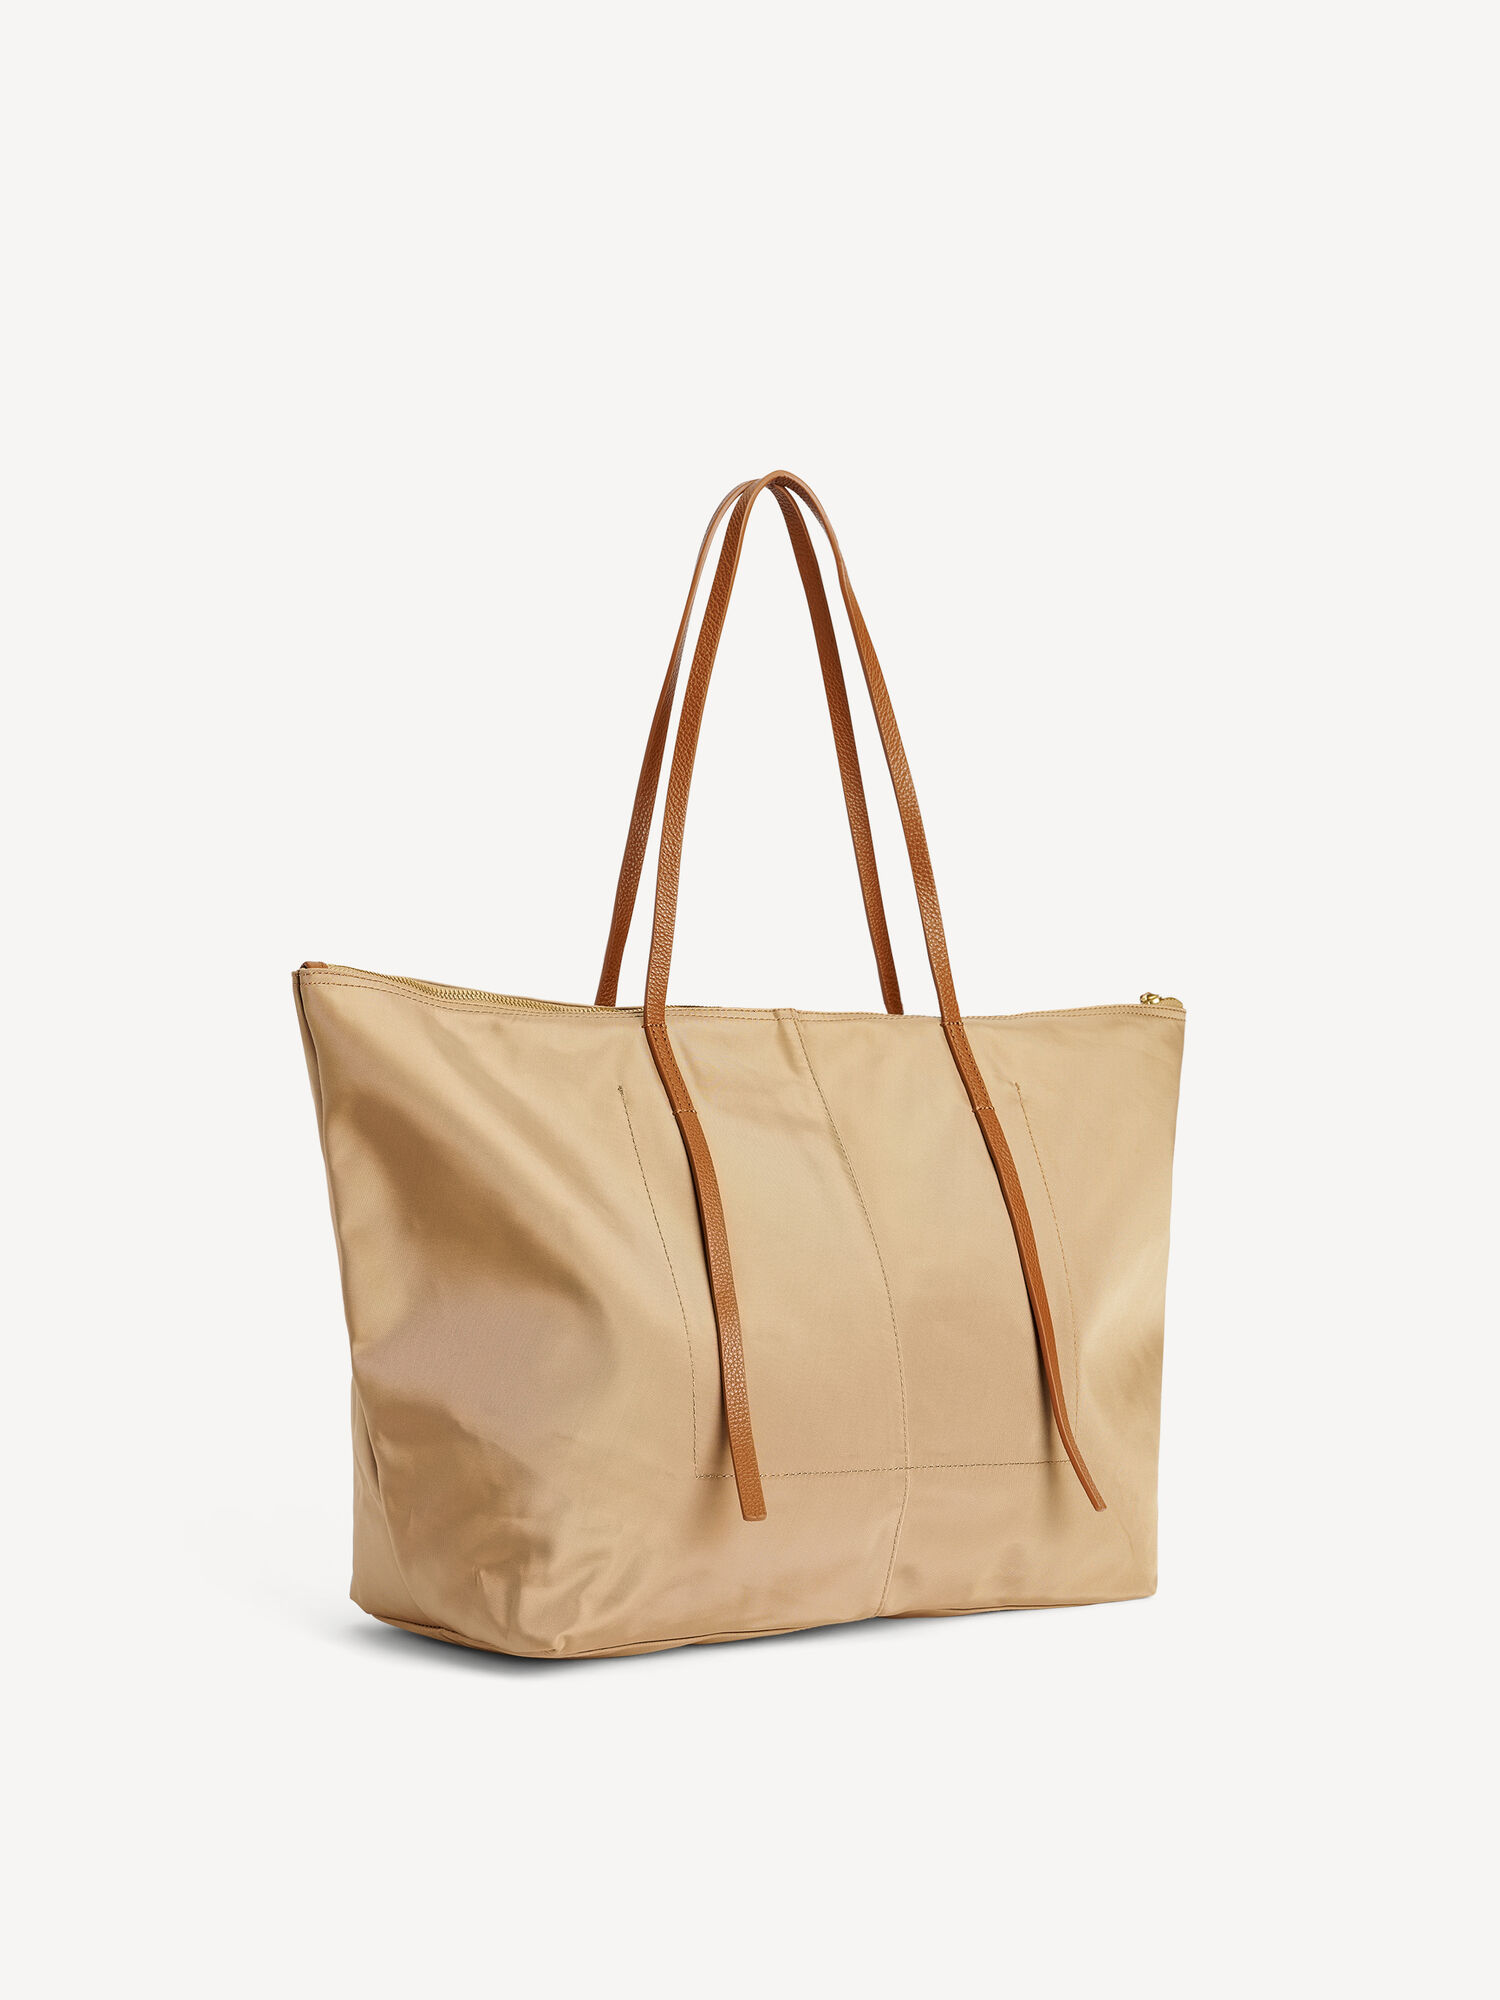 Nabelle Tote